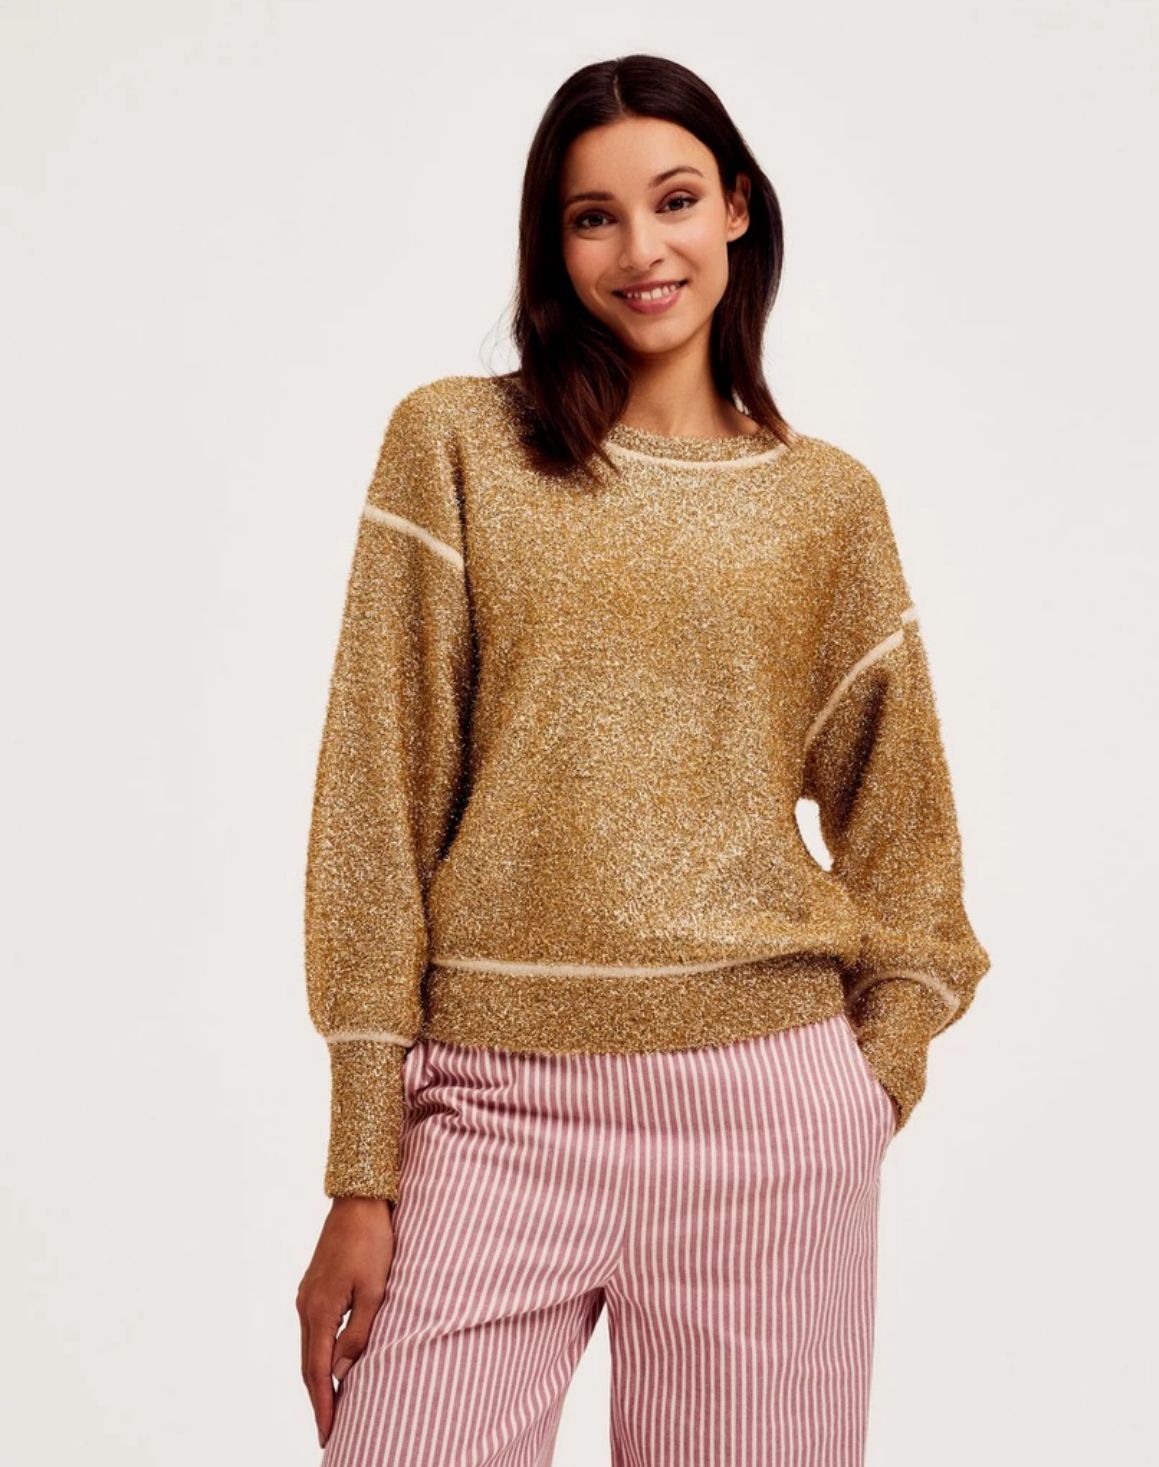 PUNT Pullover from CKS Fashion in Gold